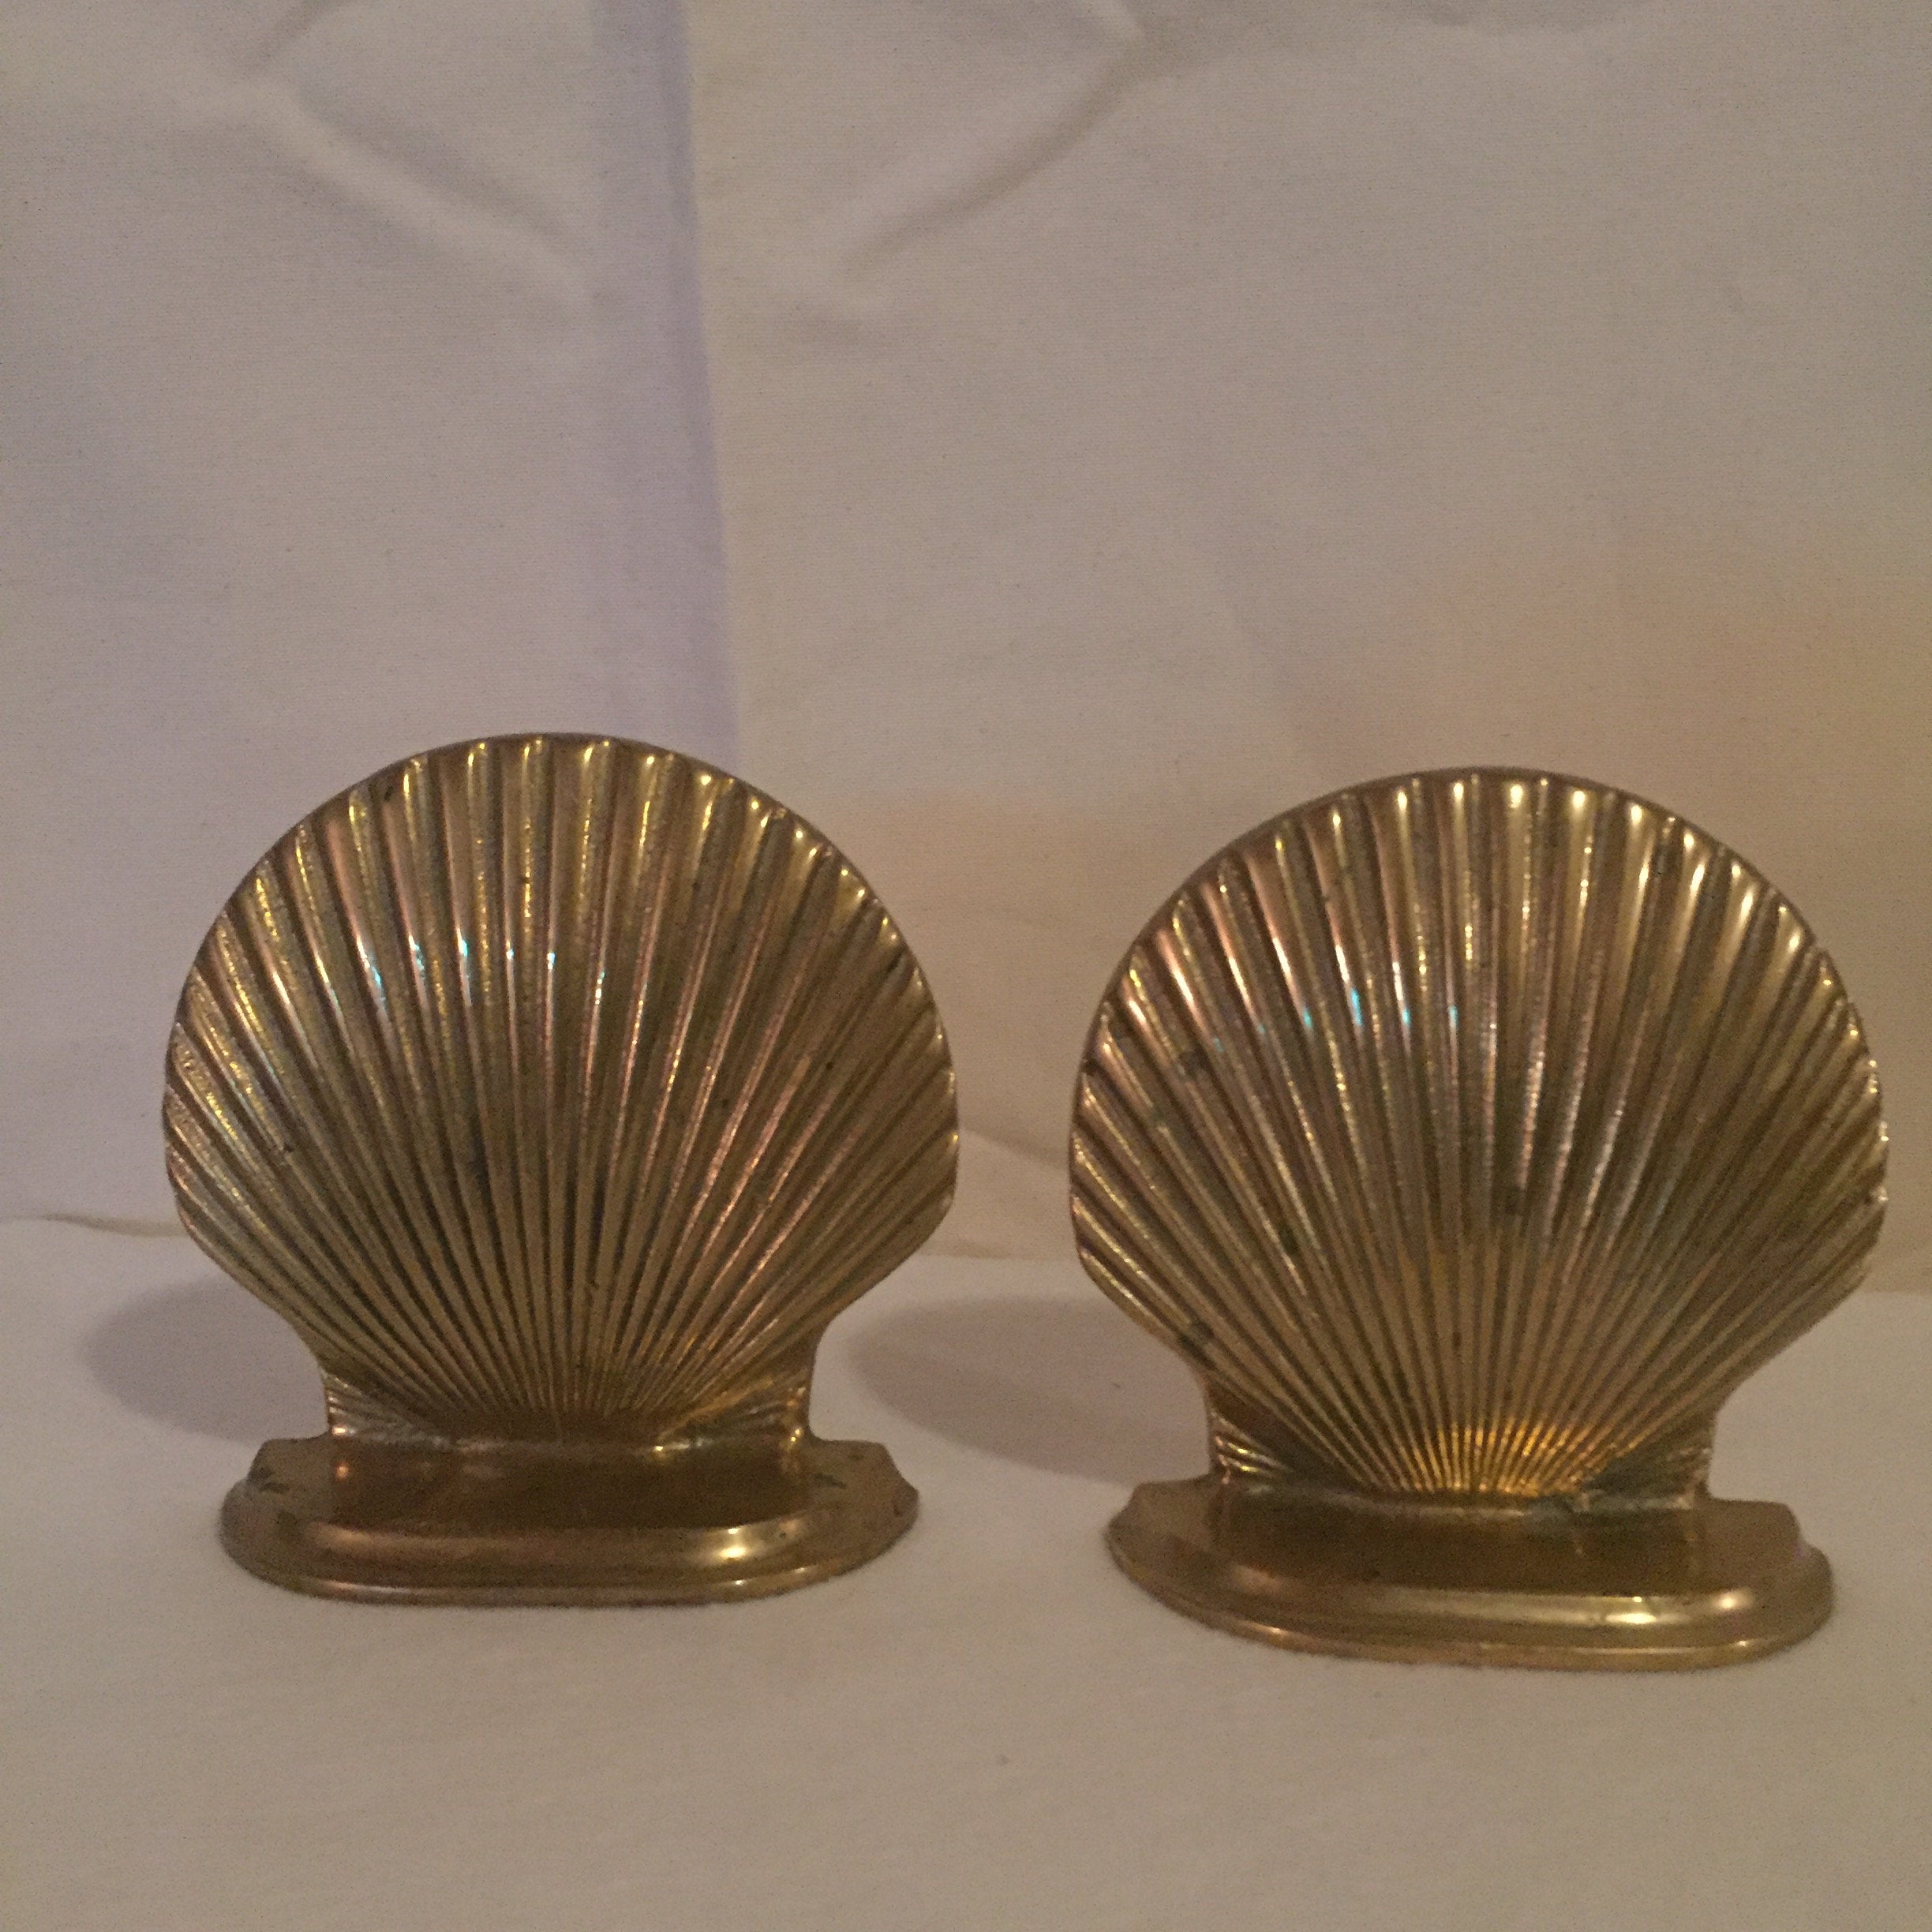 Brass Clam Shell Seashell Bookends - A Pair